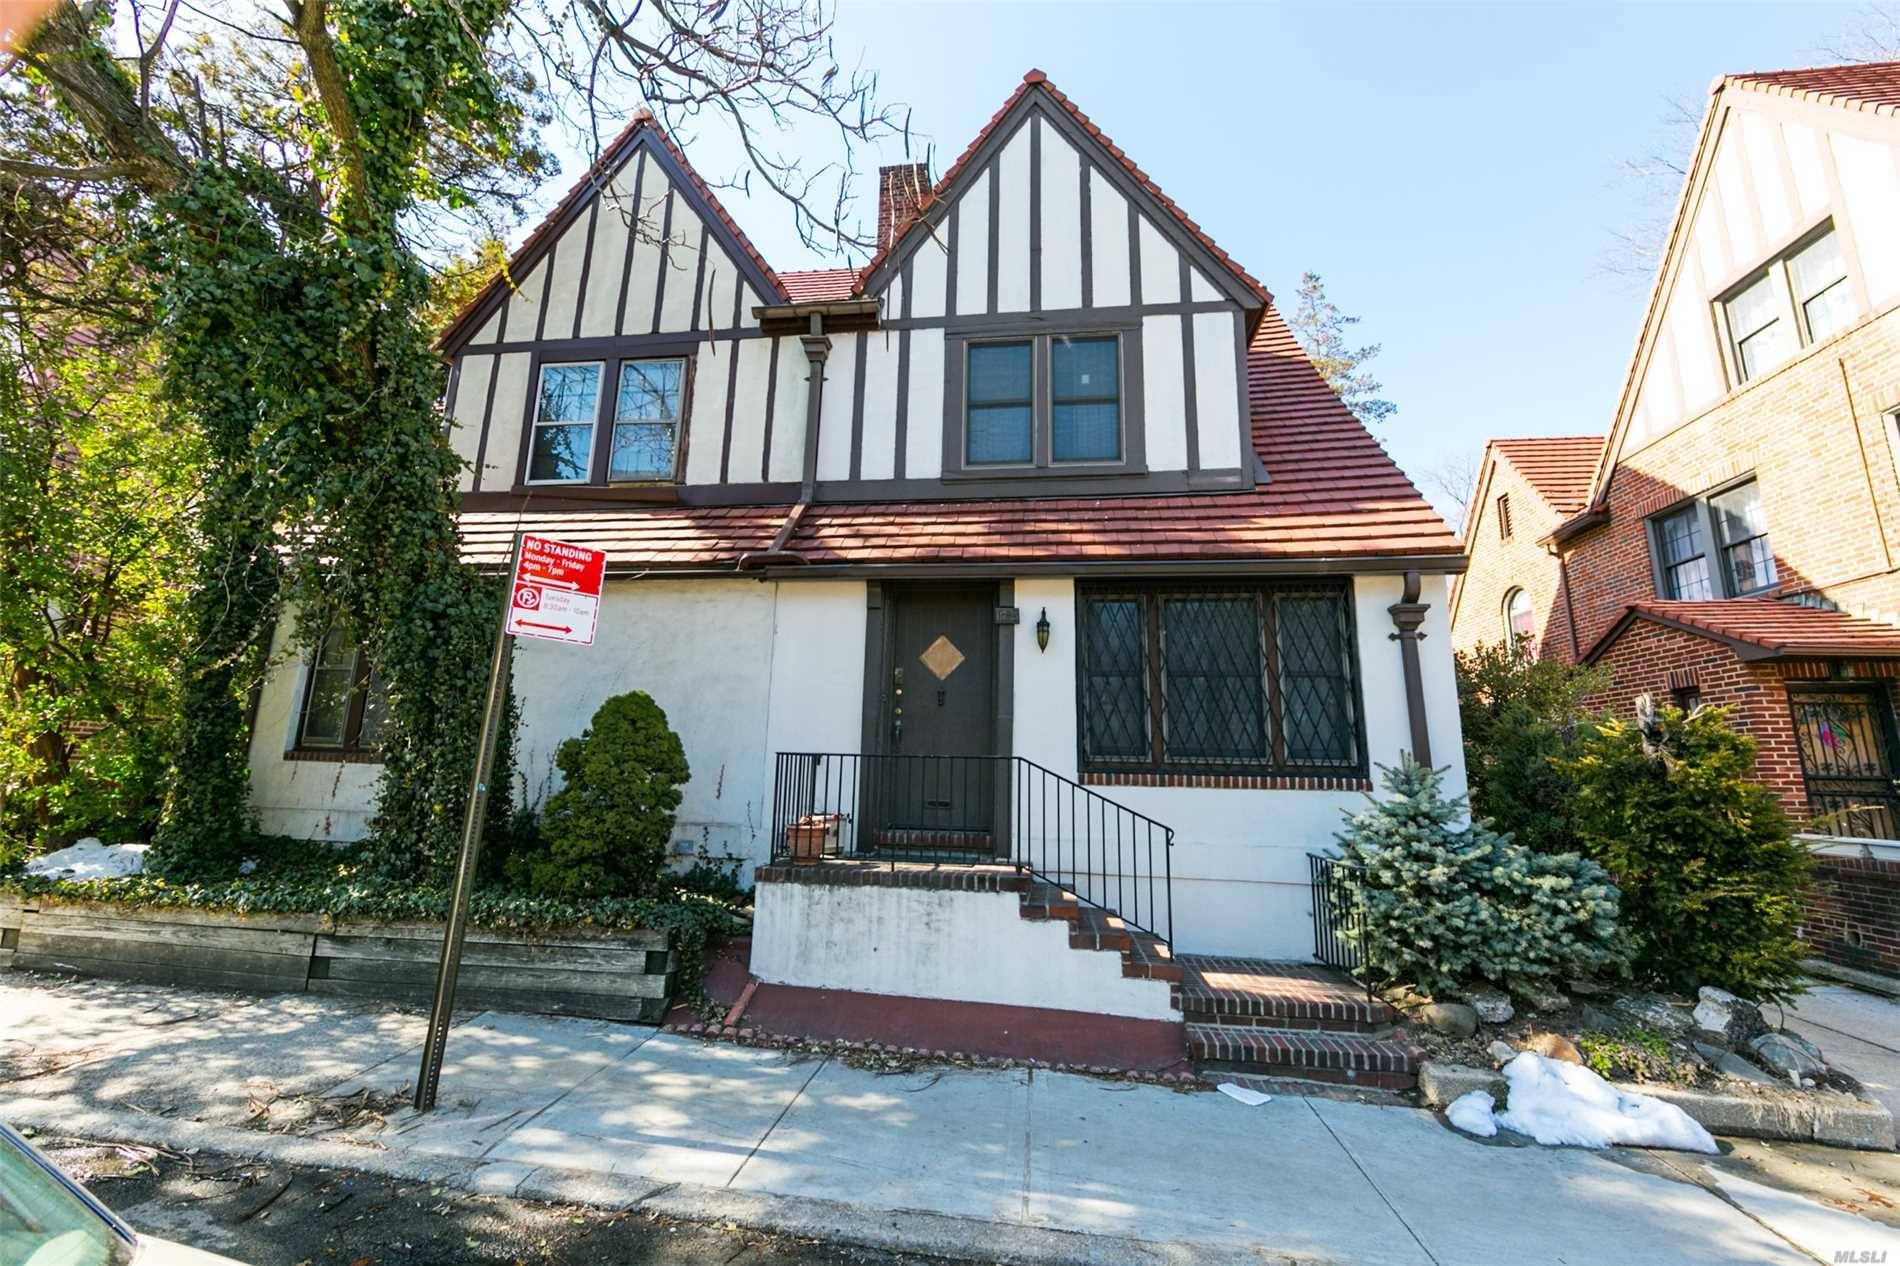 Extraordinary Semi-Detached Tudor Home Located In Highly Desirable Forest Hills!